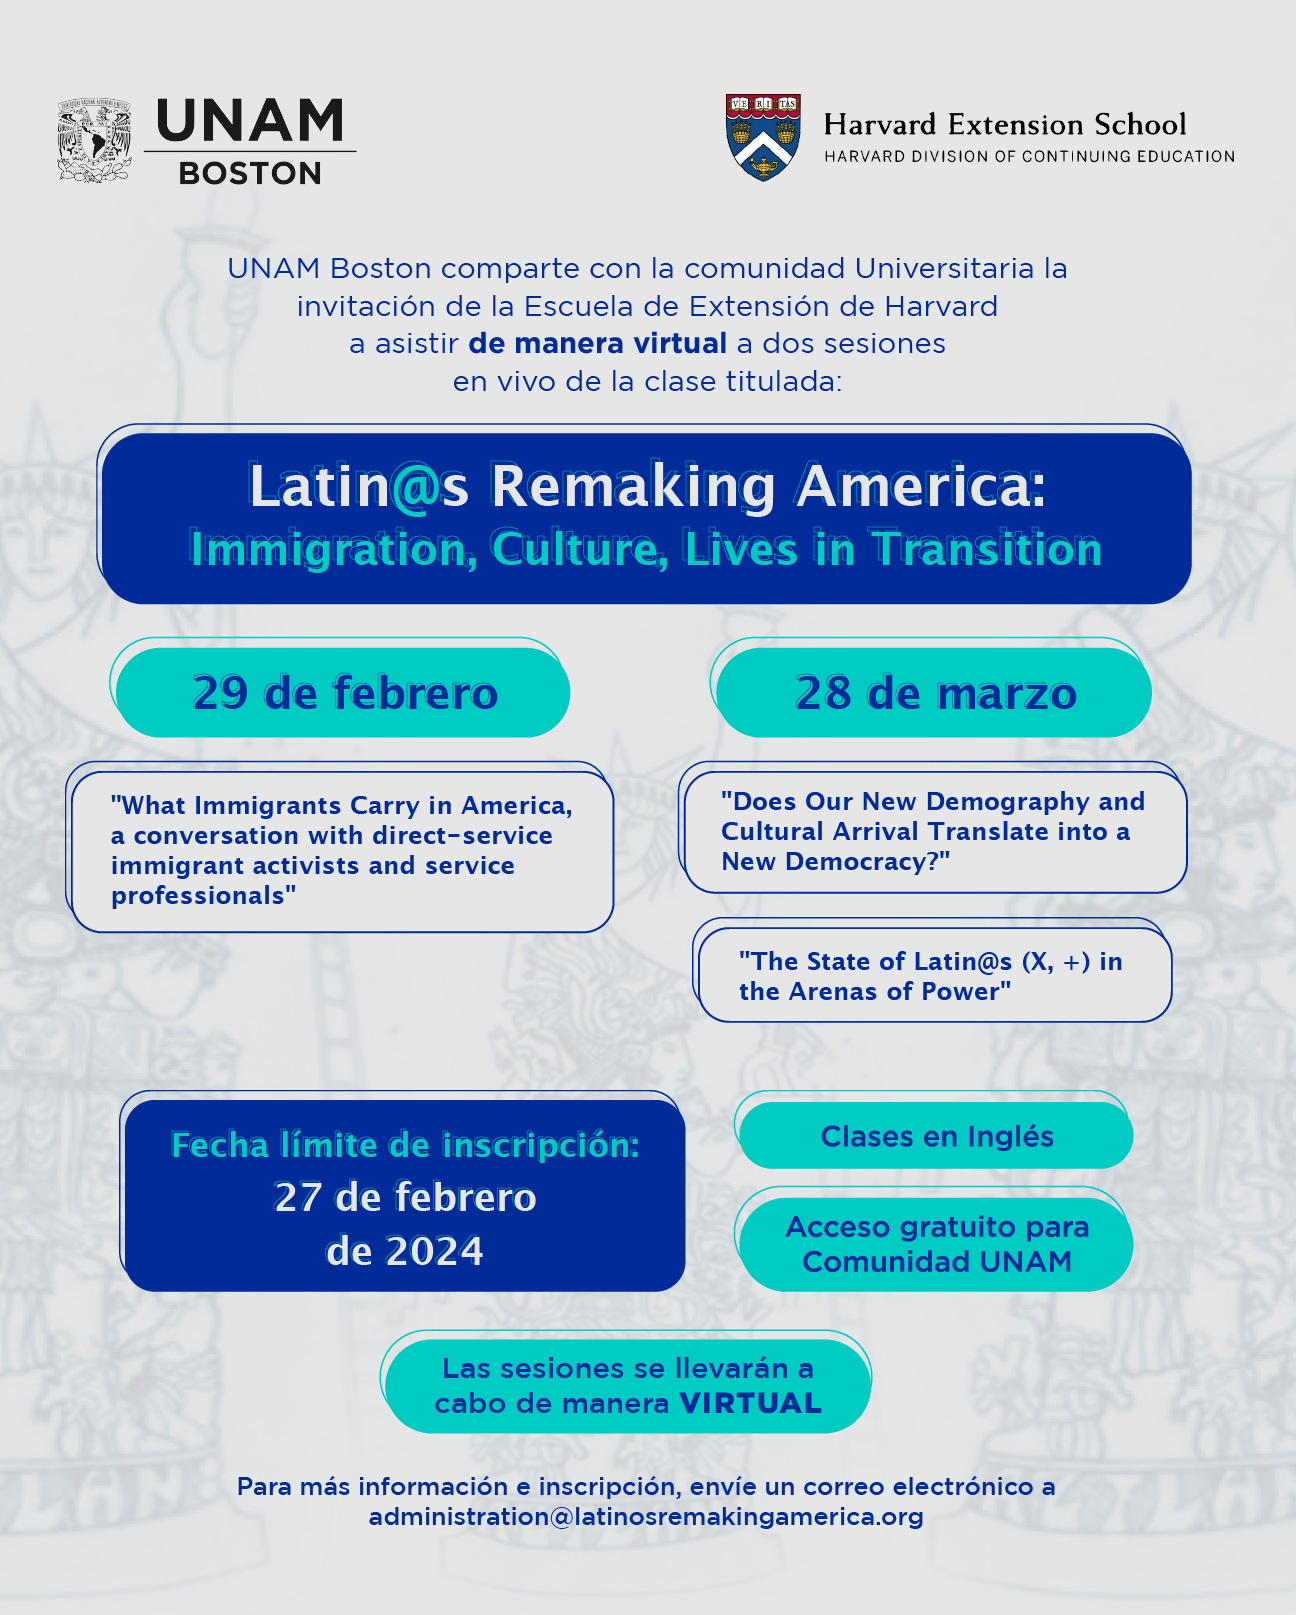 Latin@s Remaking America: Immigration, Culture, Lives in Transition.